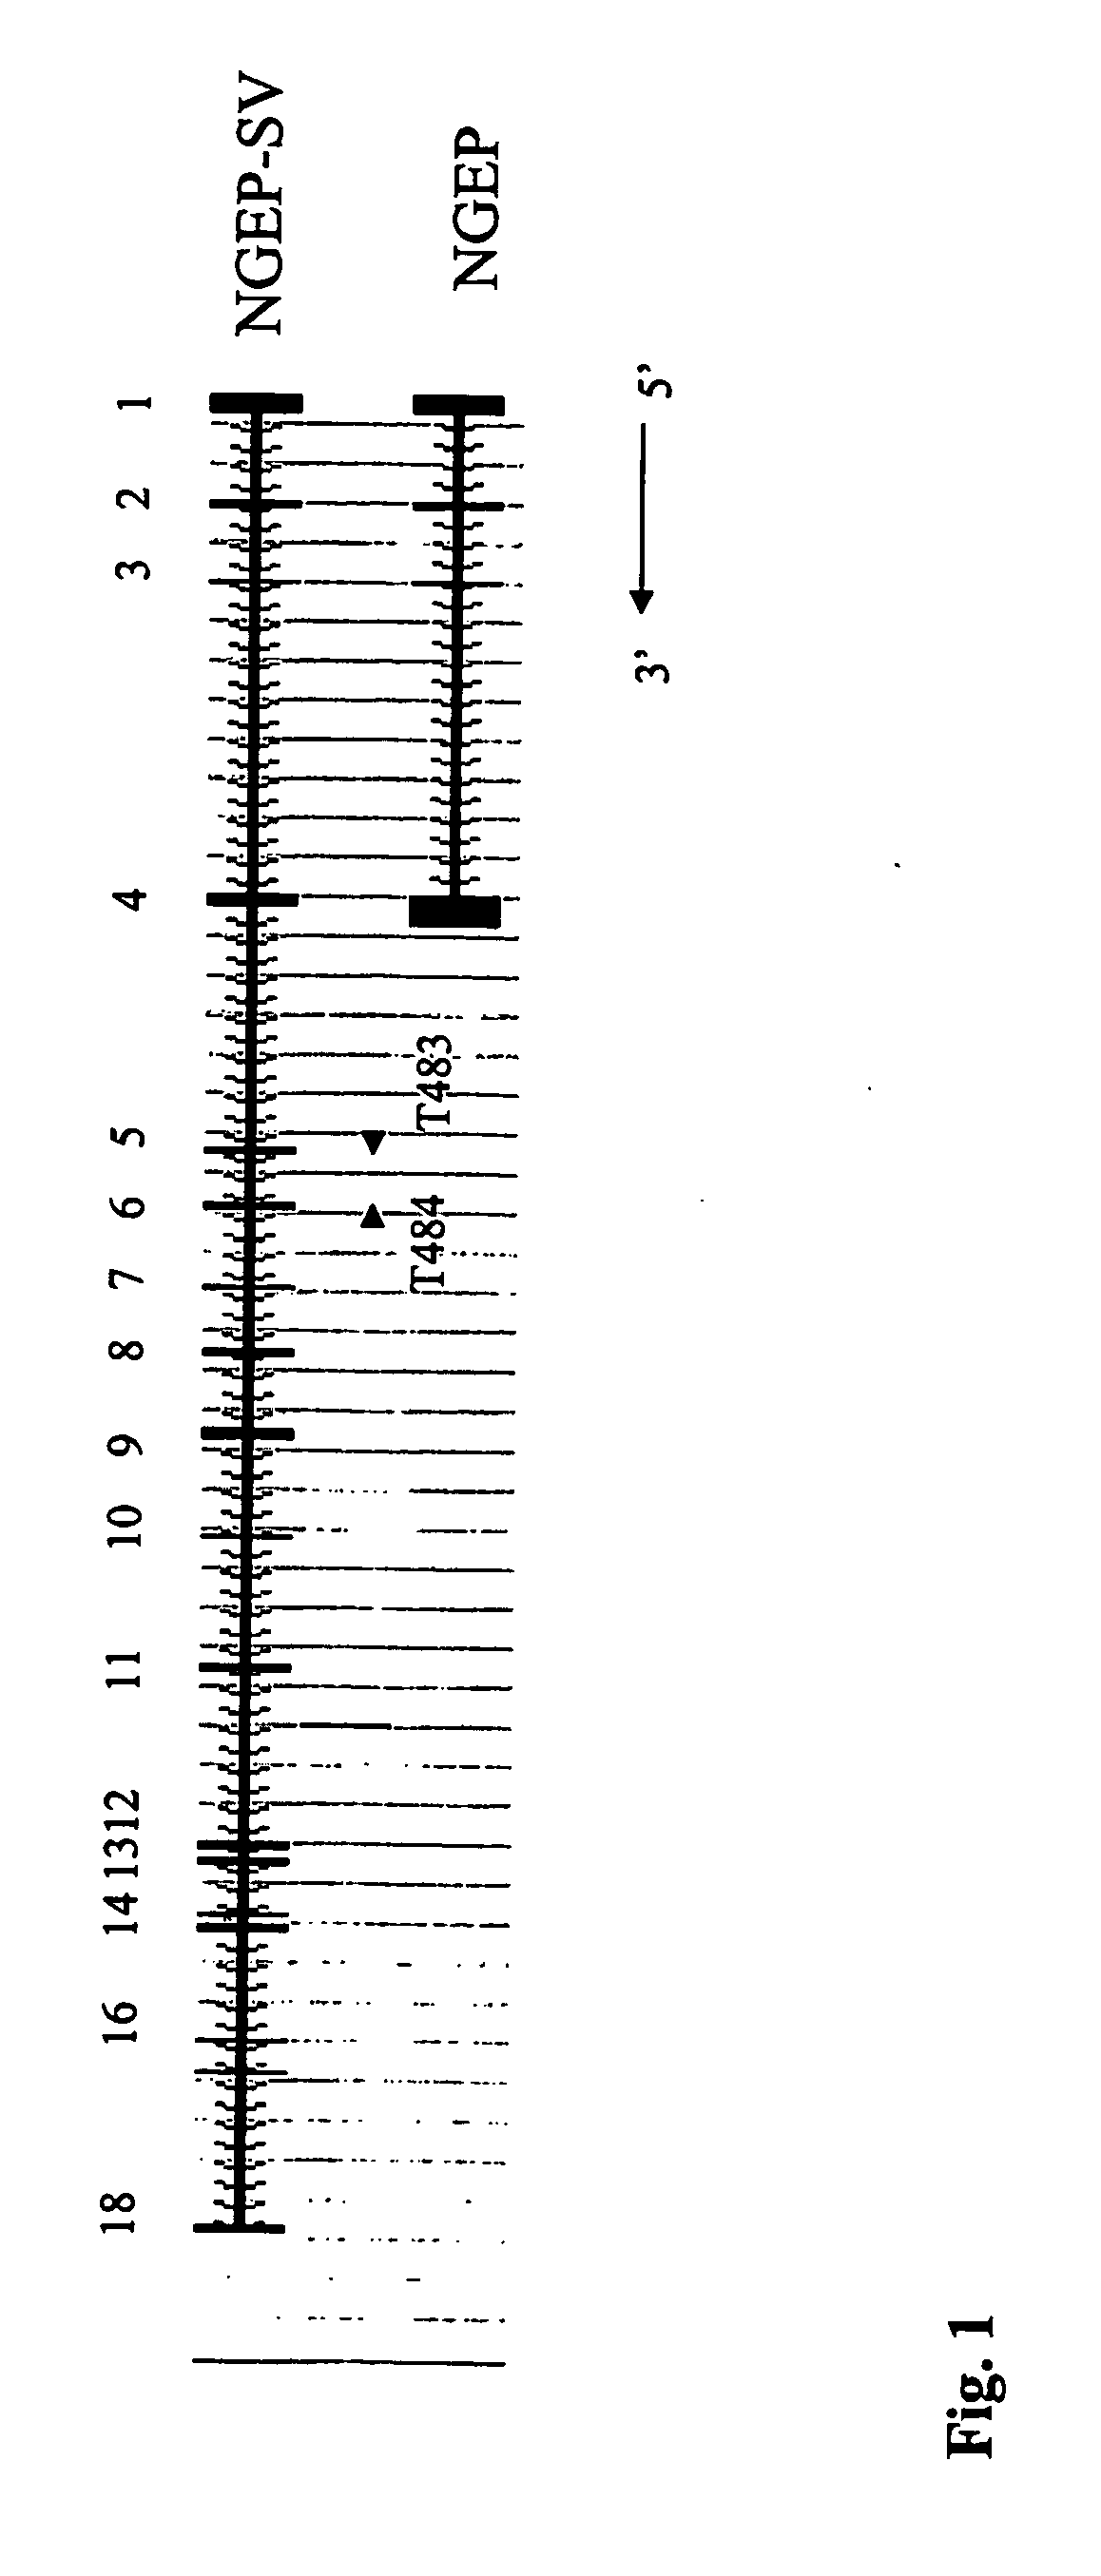 Gene expressed in prostate cancer, methods and use thereof